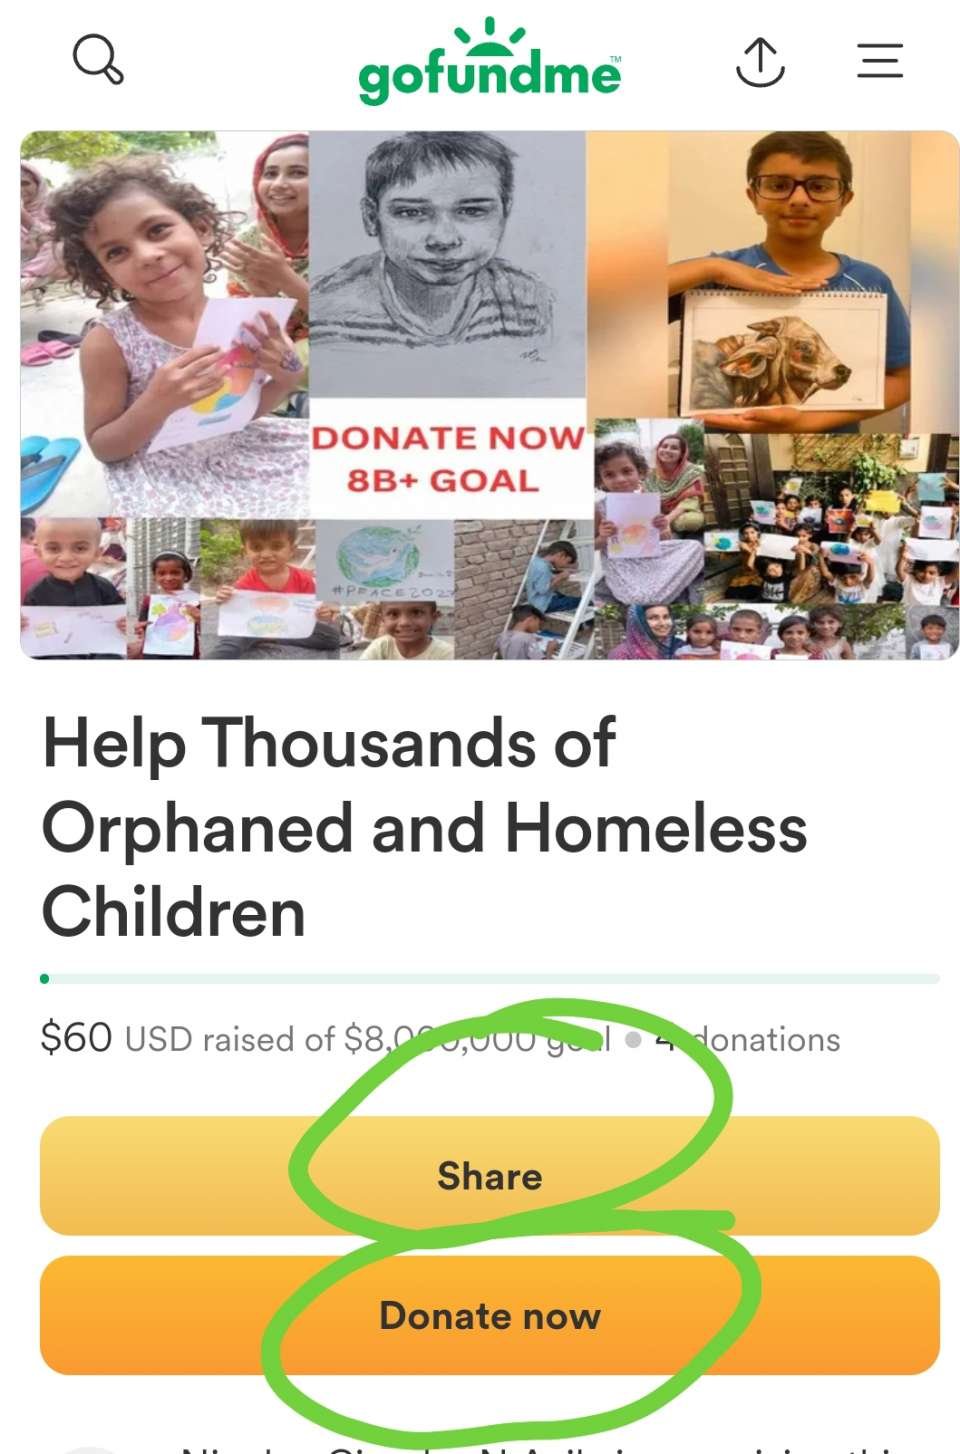 Hi It needs your 10+ shares Today and/or donation 👍 thank you very much my dear Global family 🌎❤️<br />for joining hands DAILY, for now we raise 60$.<br />Lets accelerate  to raise up 1000$+ today<br />in simple steps:<br />share this Urgent campaign https://gofund.me/74b84d5b<br />in all social networks<br />at list 14 times +<br />in Facebook LinkedIn Twitter and with your friends and contacts<br />let's do a BIG IMPACT TODAY TO<br /><br /> GO VIRAL ok?<br /><br />Make a donation 1$+ by possibility today and write your heart 💖 touching  support message today on GoFoundme <br />Please put + to this message who SHARE this today<br /><br />Enjoy Video REPORT  https://youtu.be/bTNCgRA0vlg <br />IMPORTANT In the bright memory of Daniil, year around Famous drawing Contest for #Peace2027 is held, as Daniil has been drawing #PeacePictures in last days, we invite you to<br /><br />Happily donate today to the Daniil Foundation to support his cause https://www.gofundme.com/f/help-thousands-of-orphaned-and-homeless-children https://ivacademy.net/en/donate  <br /><br />Enjoy Sharing today this foundation with friends and wide in social networks to GRANT you and  all 8B+ people participate and complete ultimate Global peace building by 2027 in every country ok?<br /><br />Yours @Prophet Nicolae Cirpala +79811308385 Tel WhatsApp❤